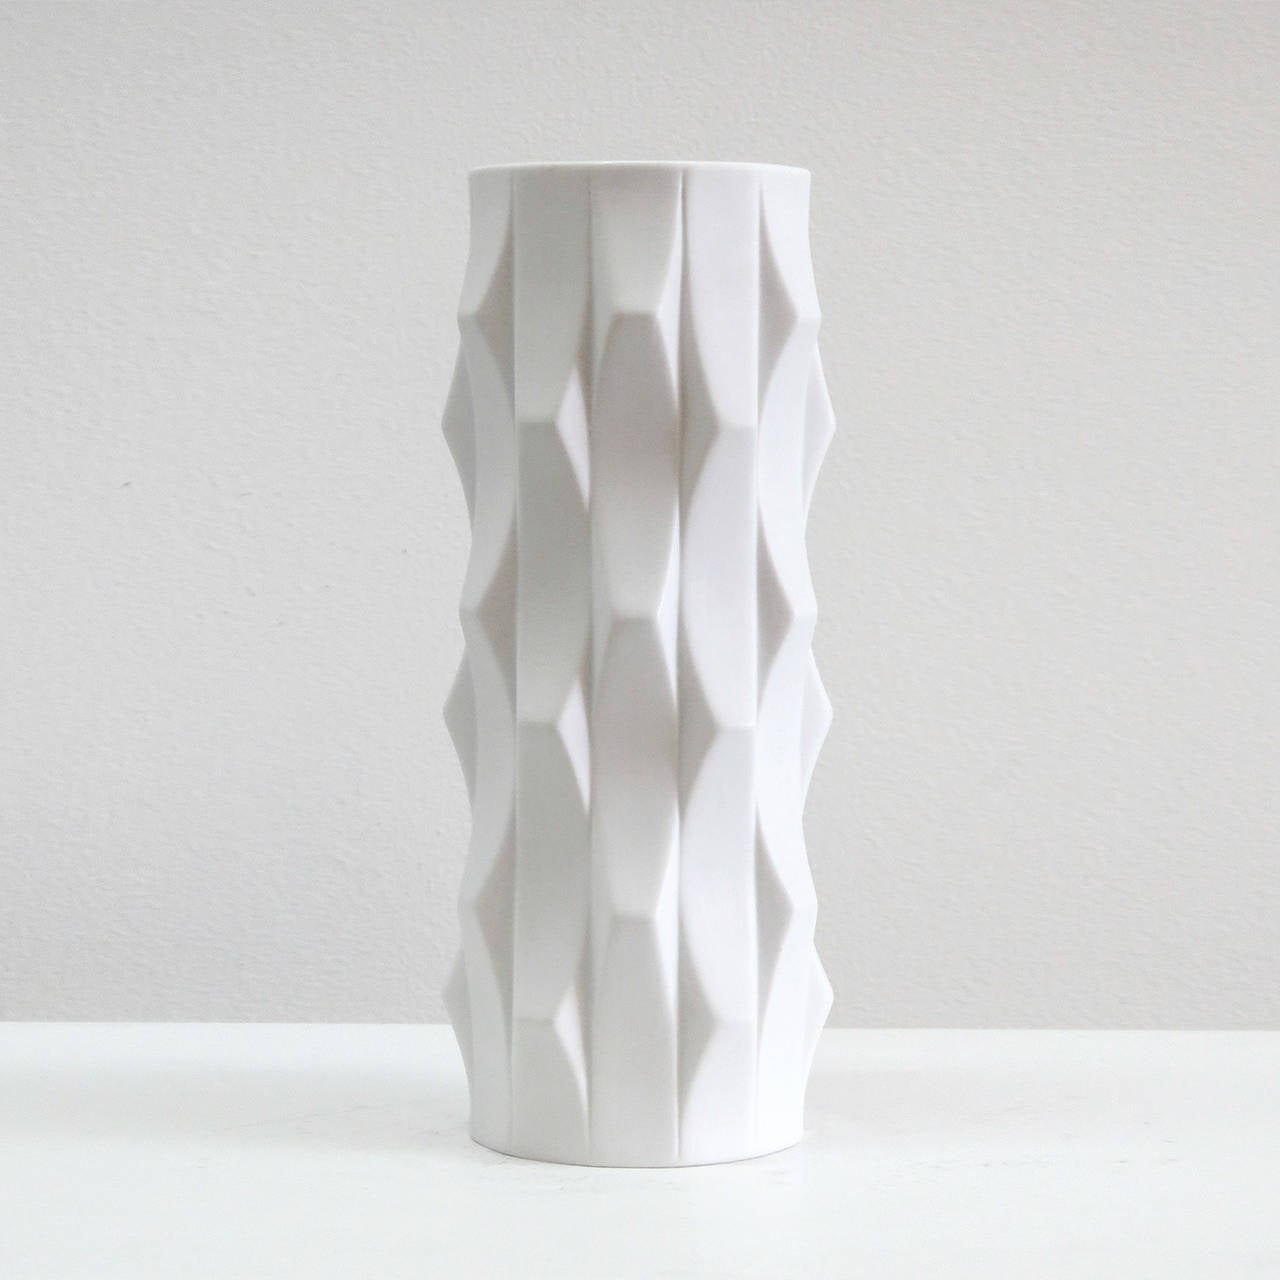 sculptural porcelain vase by Heinrich Fuchs for Hutschenreuther, released between 1968 and 1970, large version model 5090/29, matte exterior, gloss interior, marked